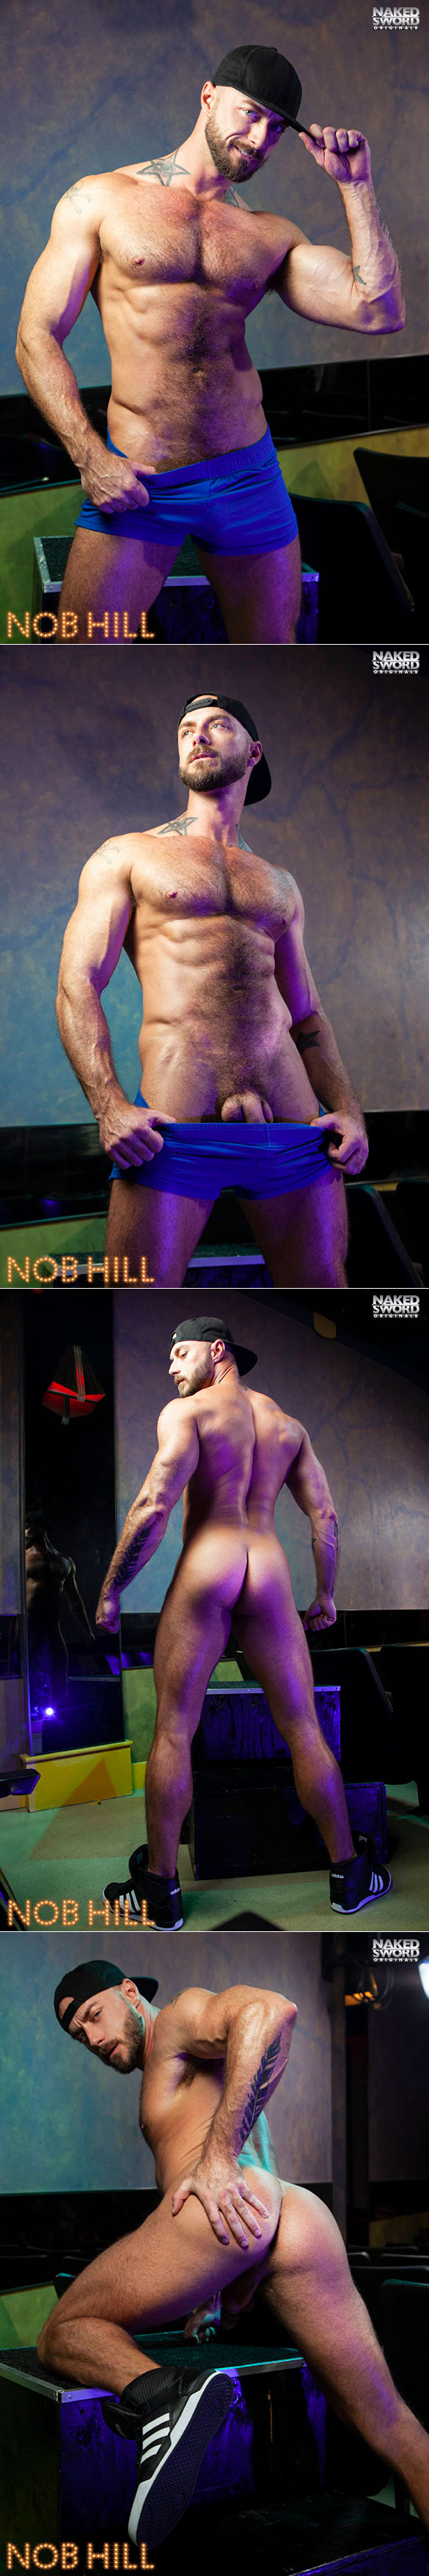 NakedSword: Adam Killian, Jessie Colter and Max Duro's bareback double-penetration threeway in "Nob Hill, Scene 4: Going out with a Bang"